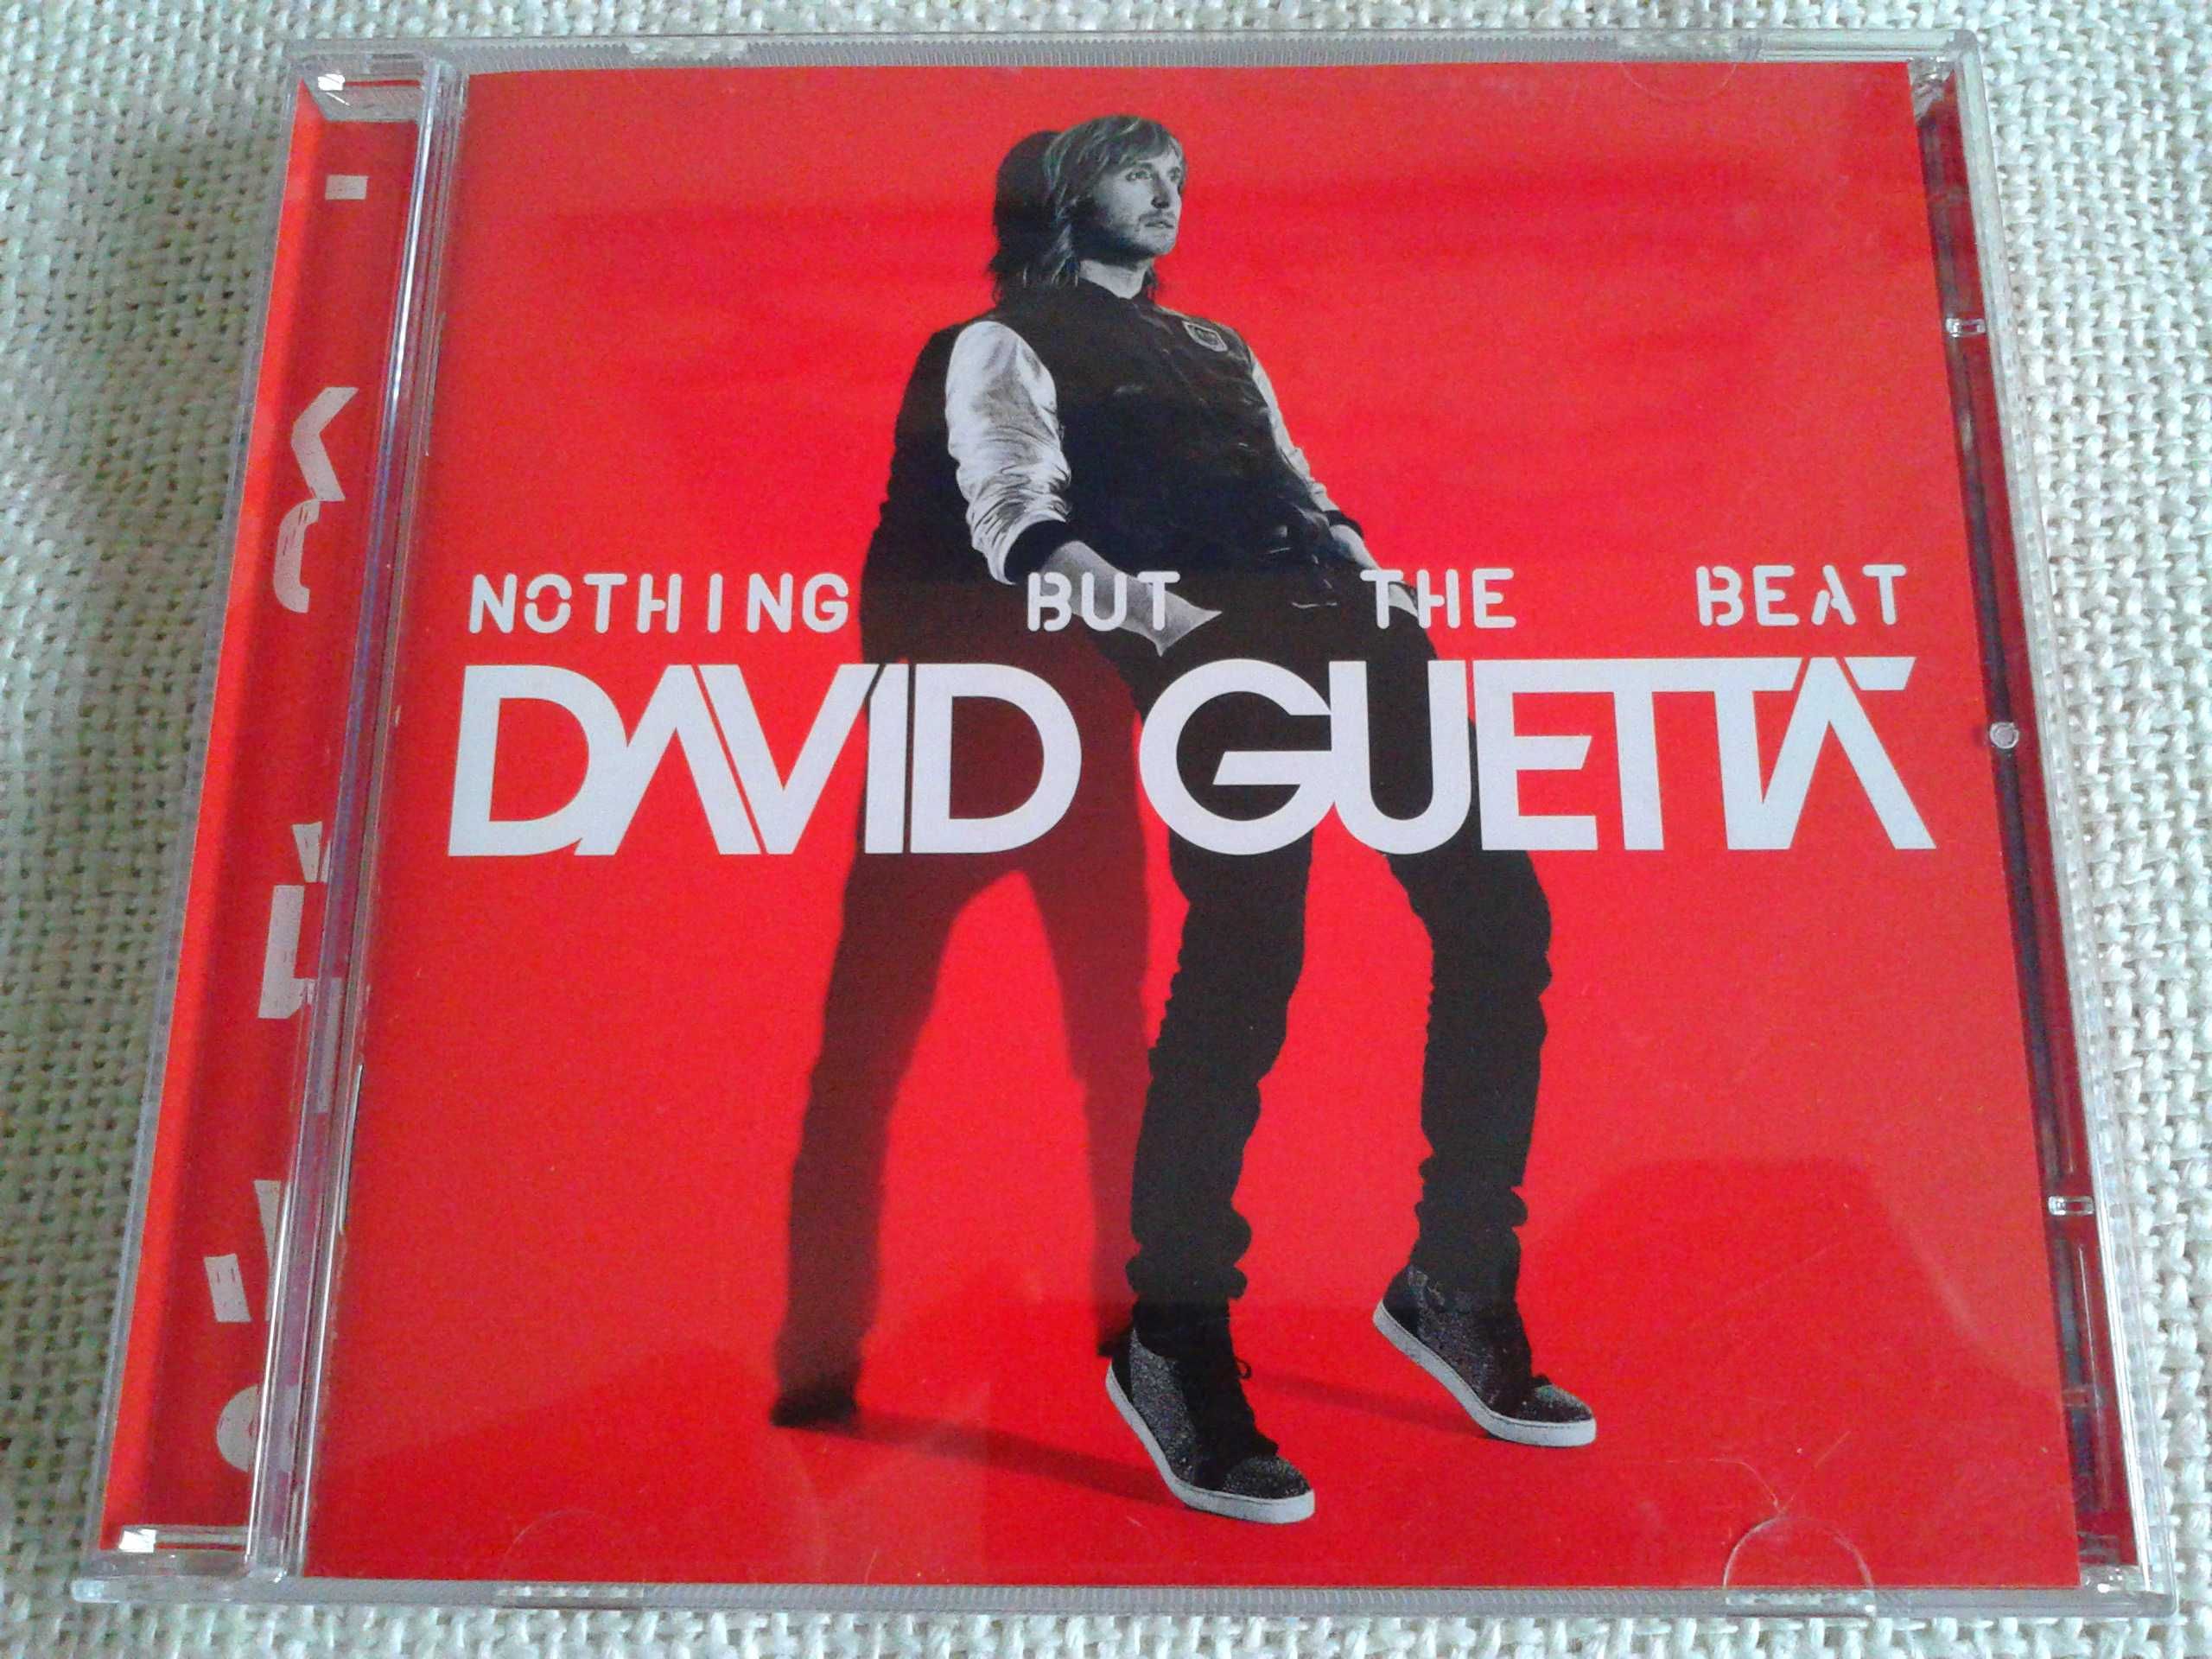 David Guetta - Nothing But The Beat  2CD